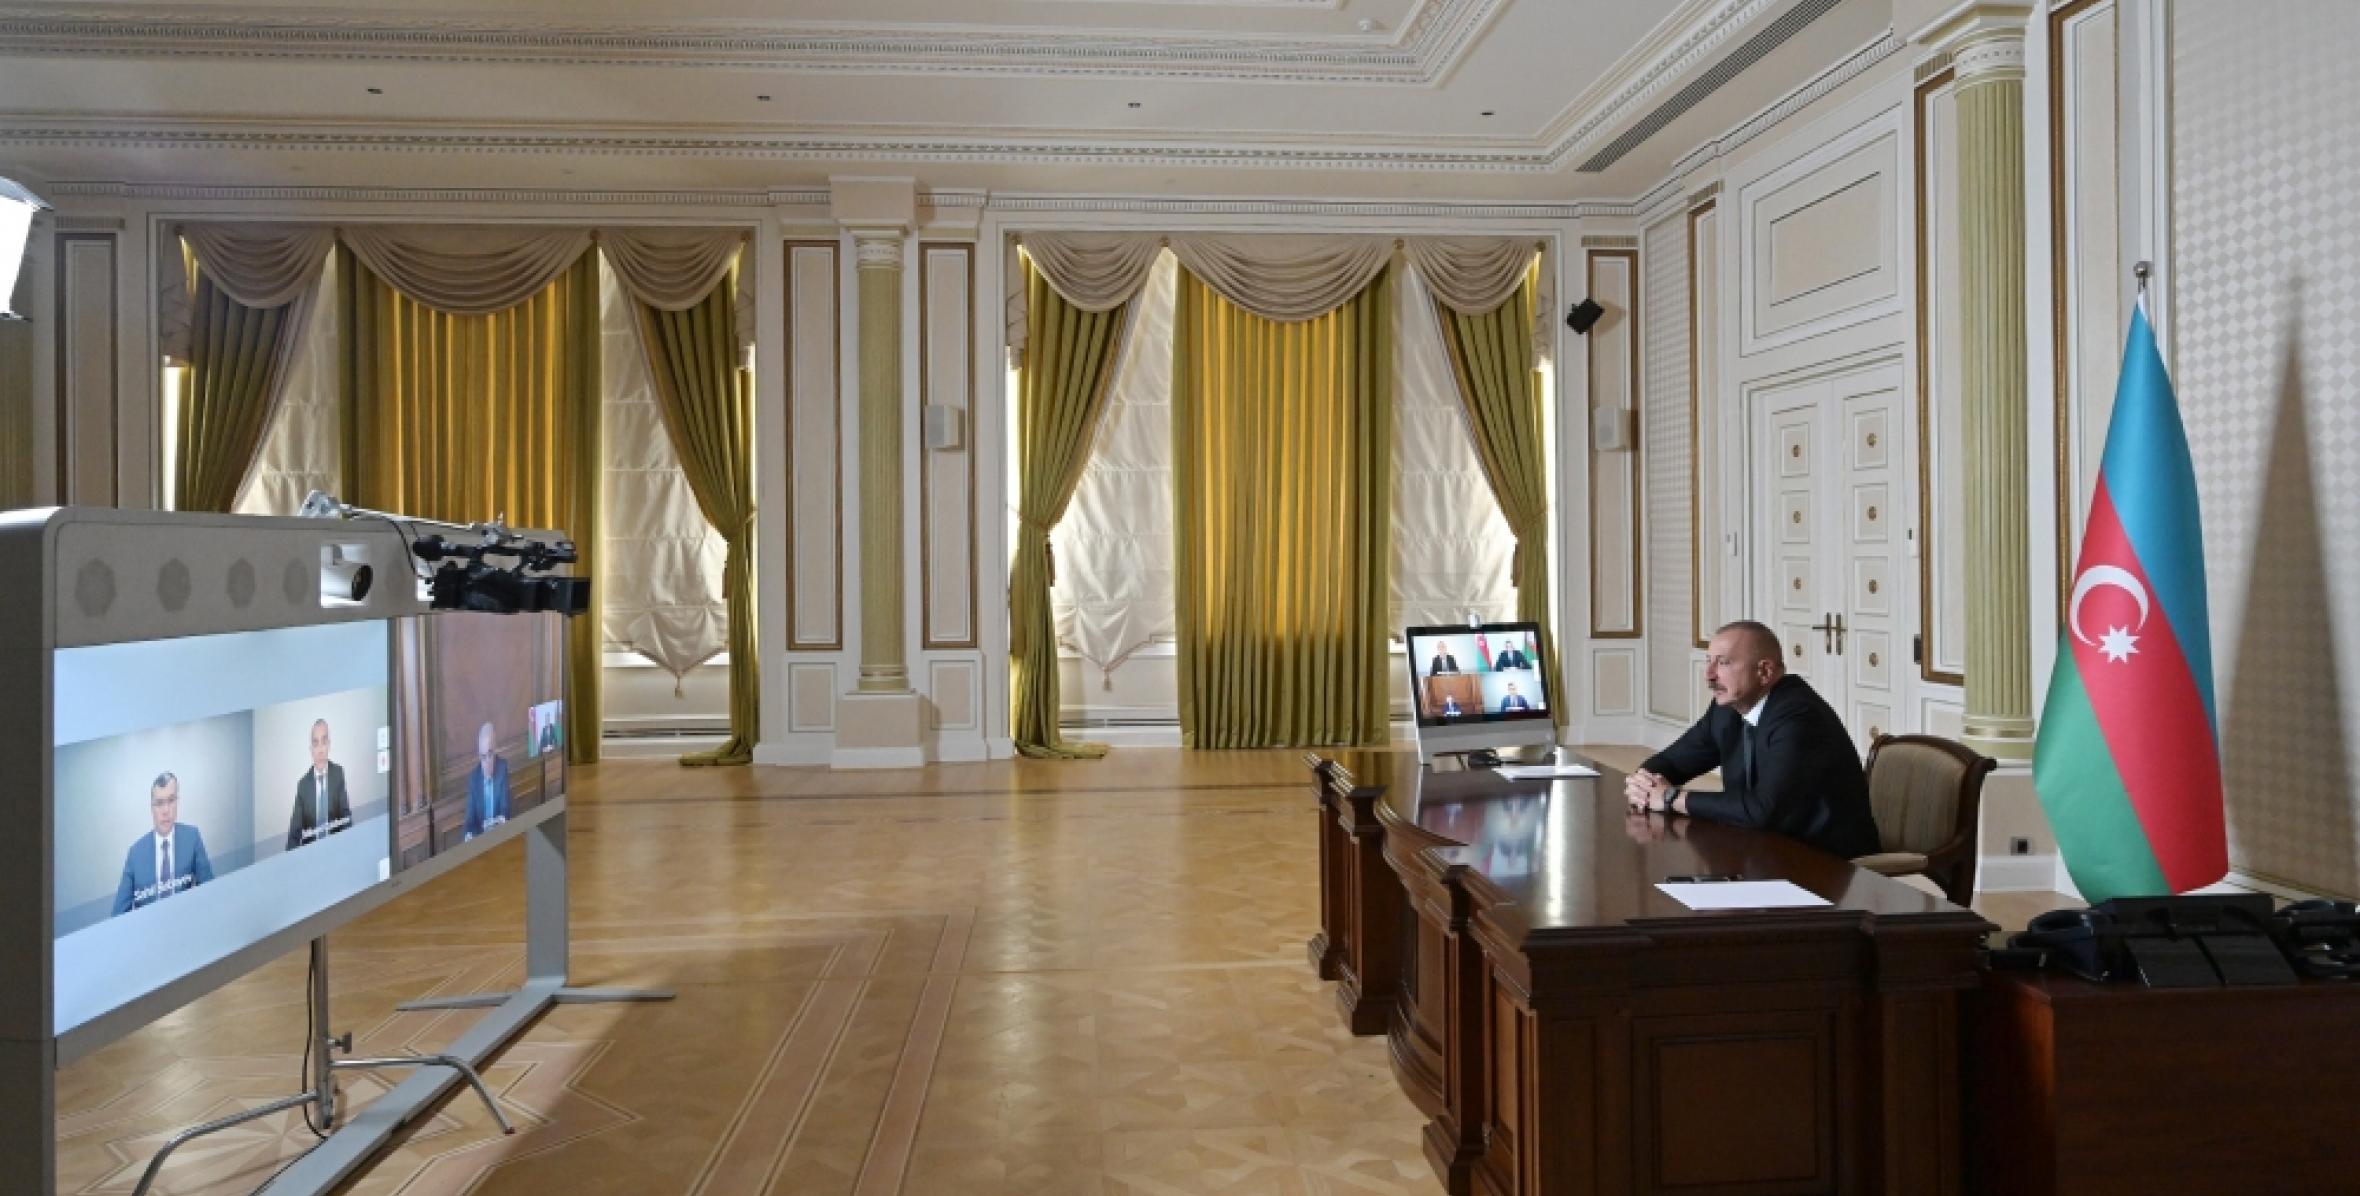 President Ilham Aliyev chaired a meeting in a video format on measures to fight coronavirus and the socio-economic situation